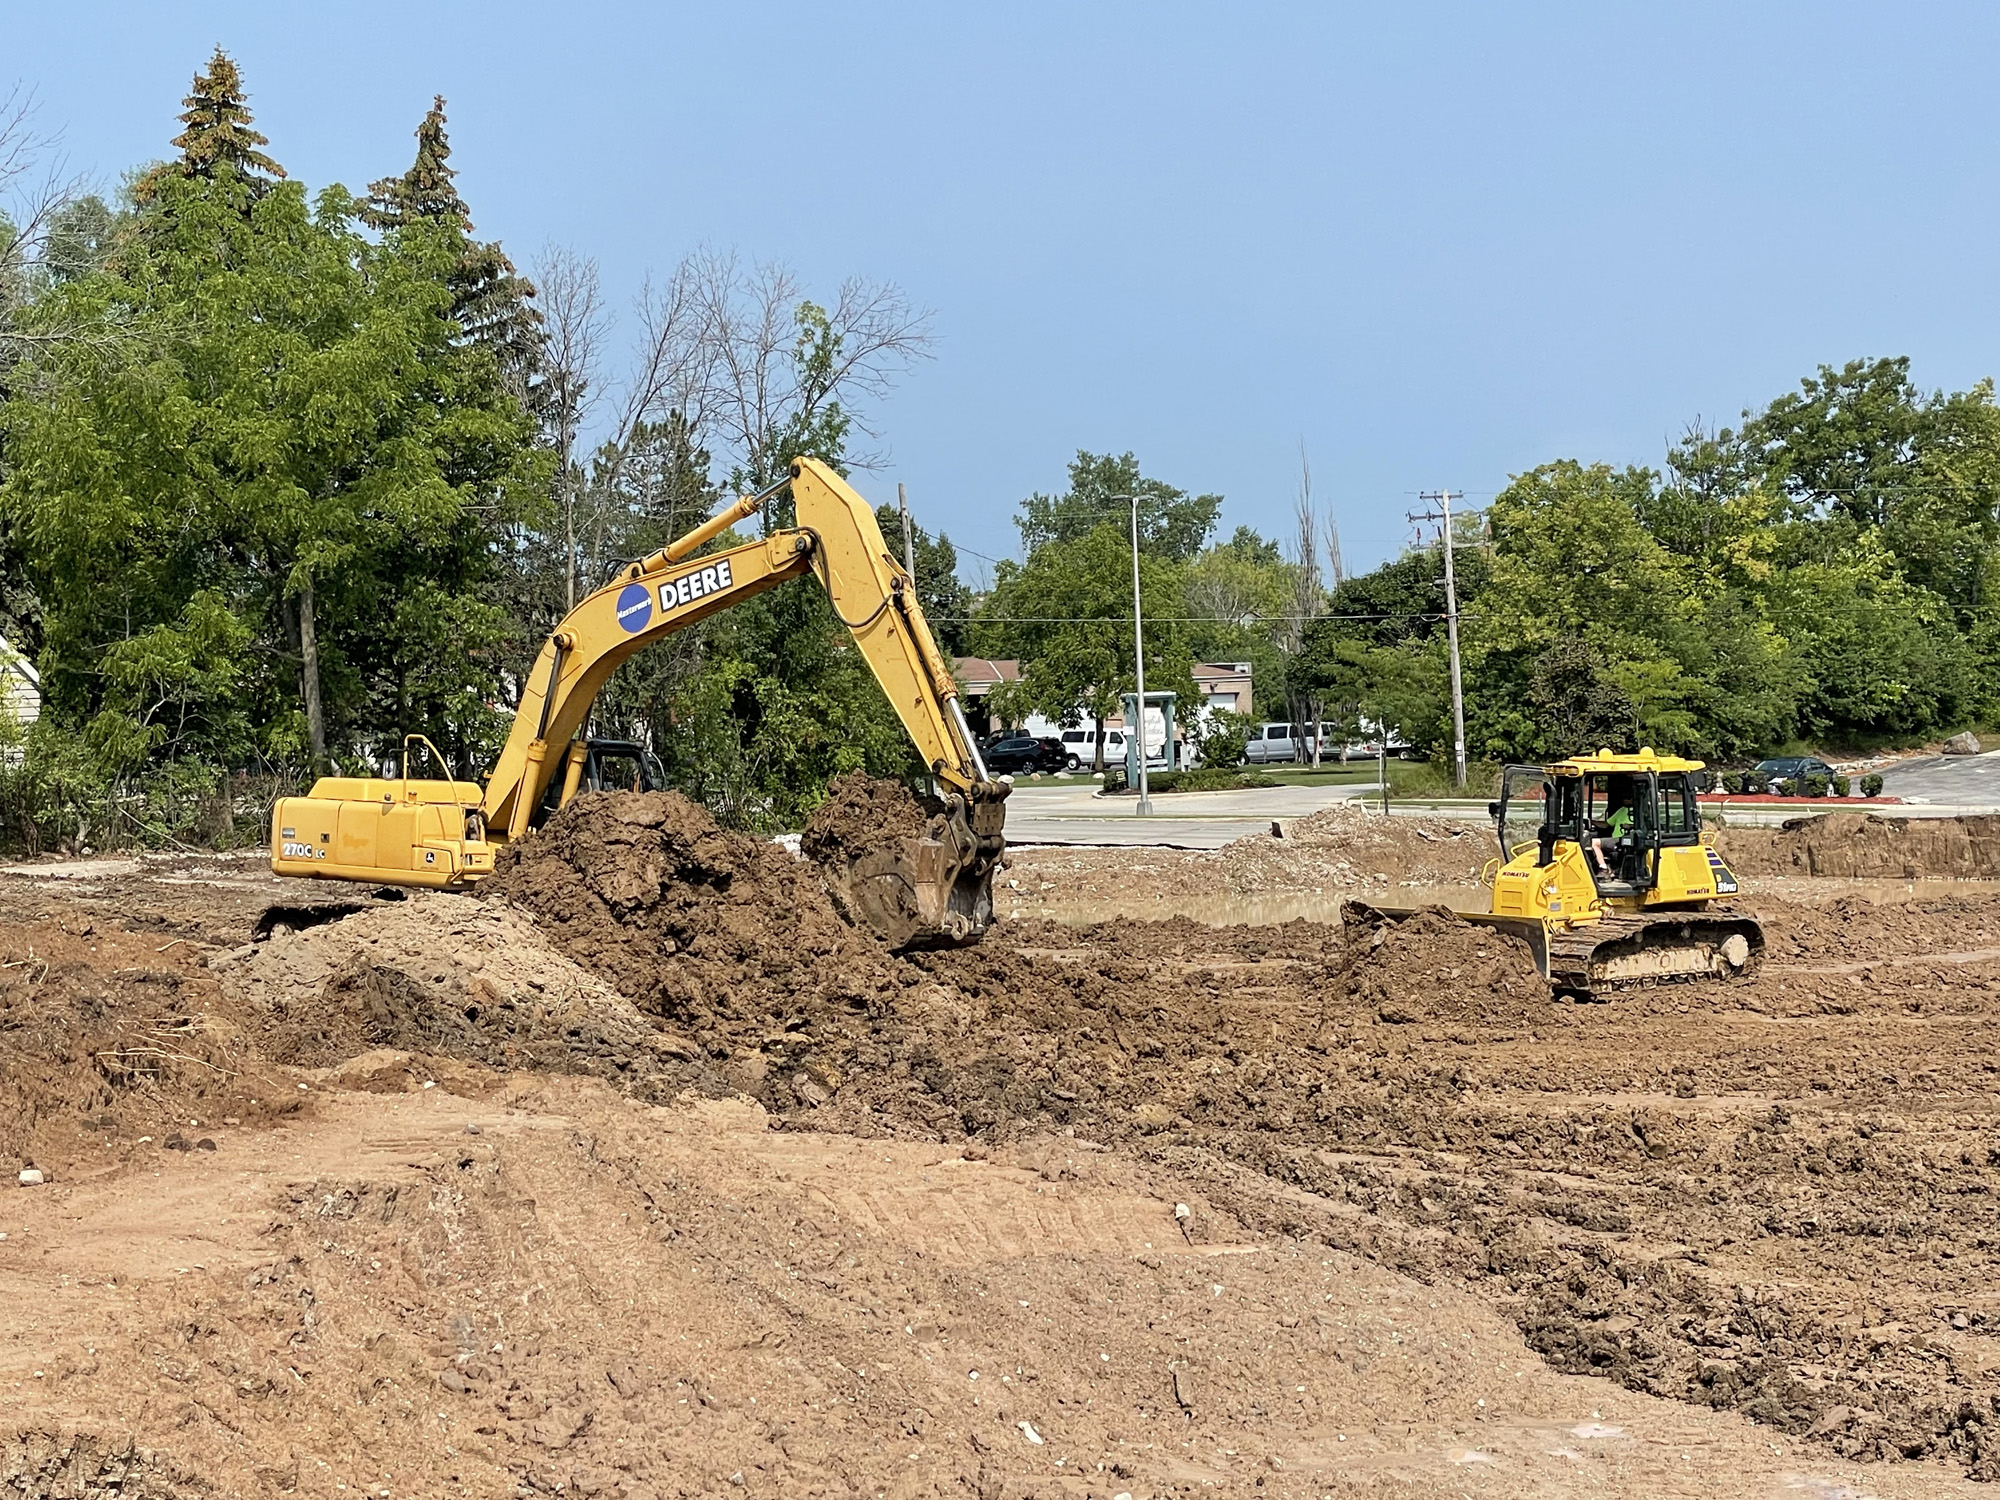 A yellow excavator and bulldozer performing land clearing operations on a sunny day in Mequon, with trees and a street in the background.